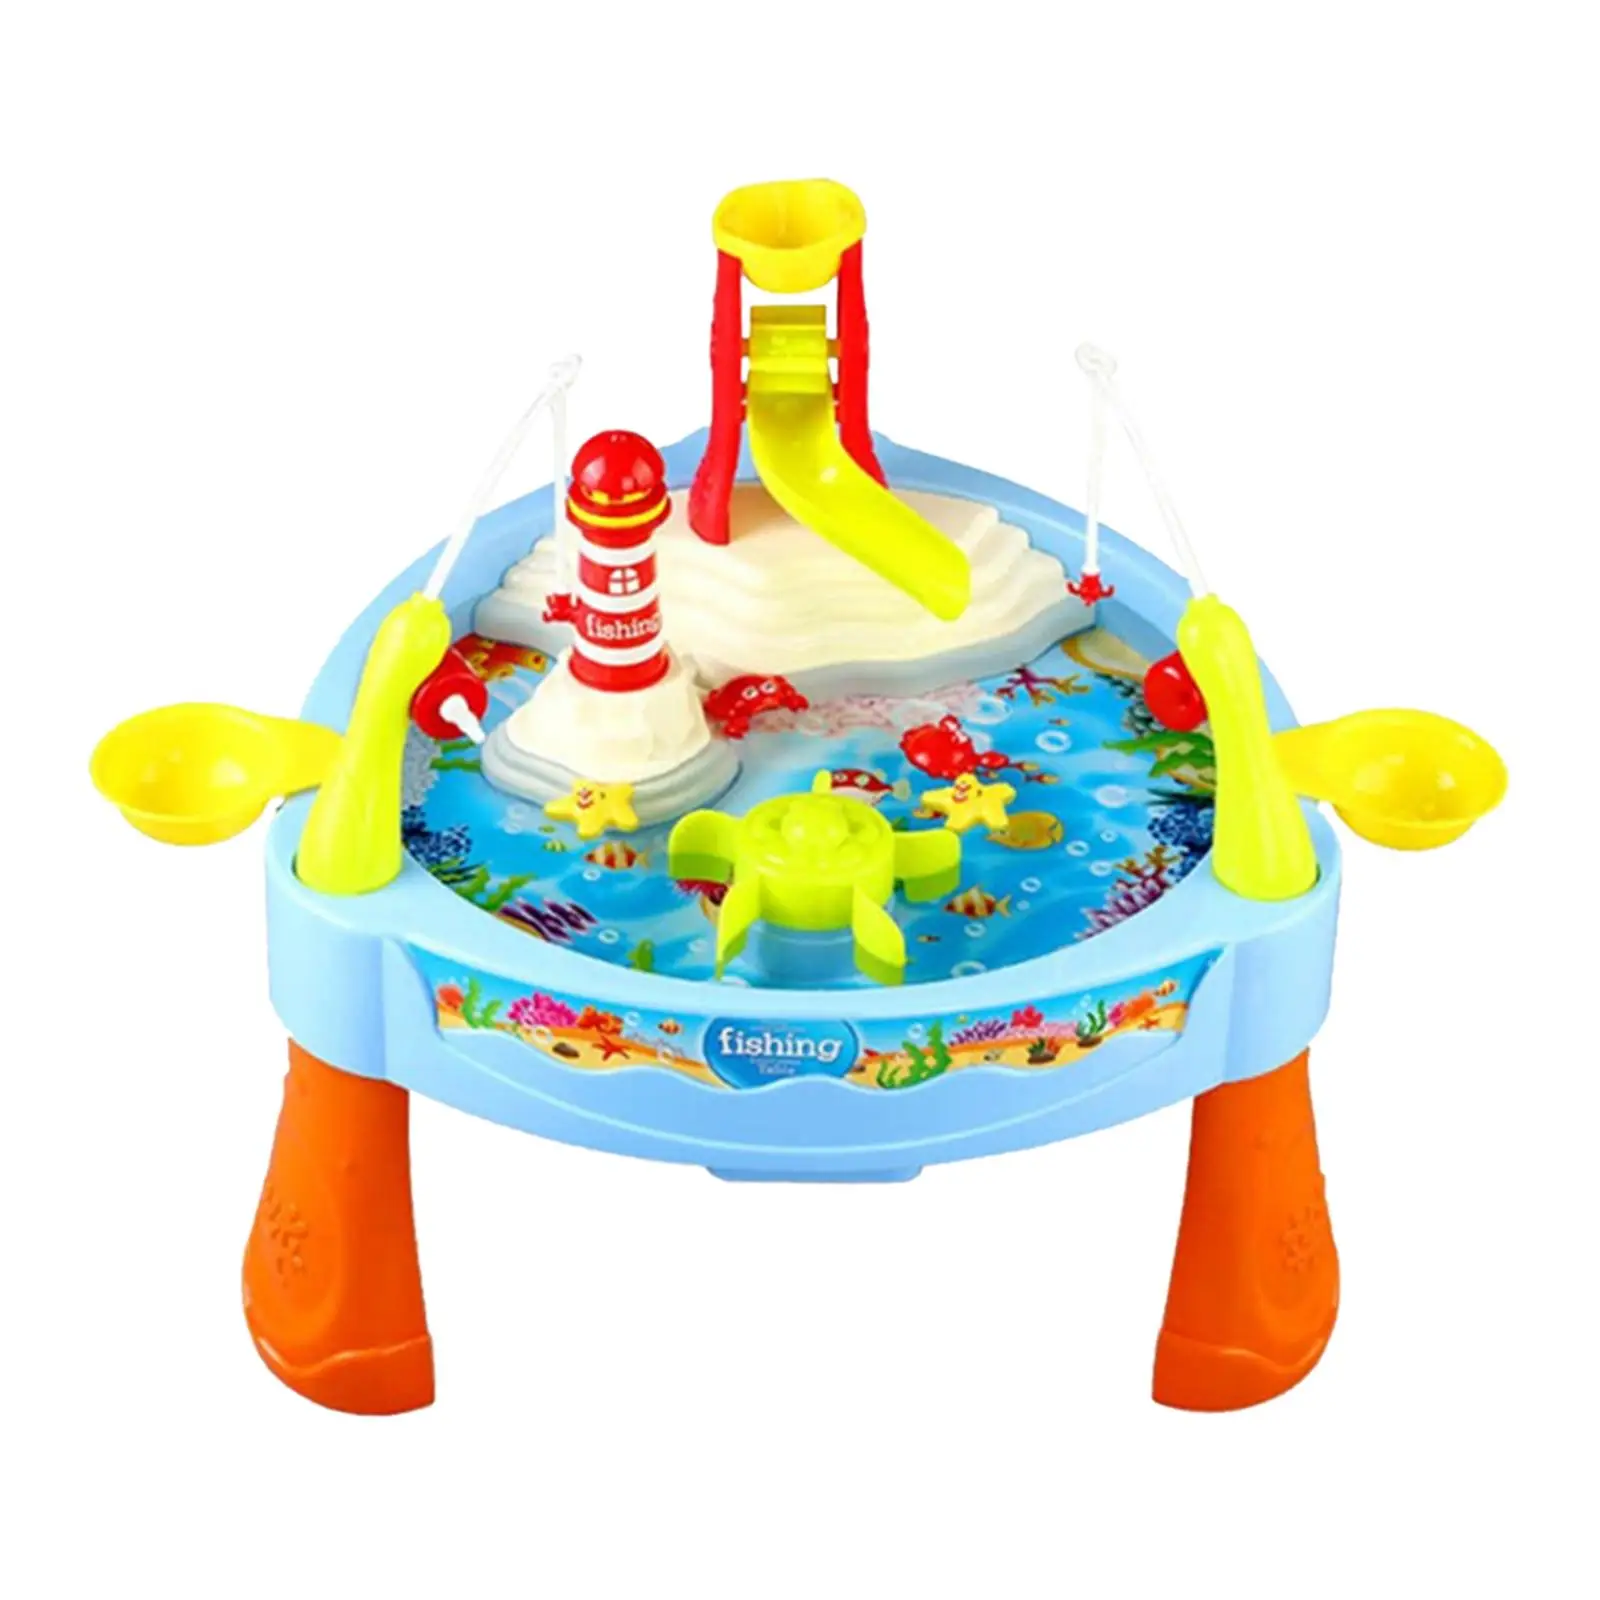 

Kids Sand Water Table Toys Summer Outdoor Toys Water Circulating Fishing Game Board Play Set for Backyard Beach Kids Girls Boys